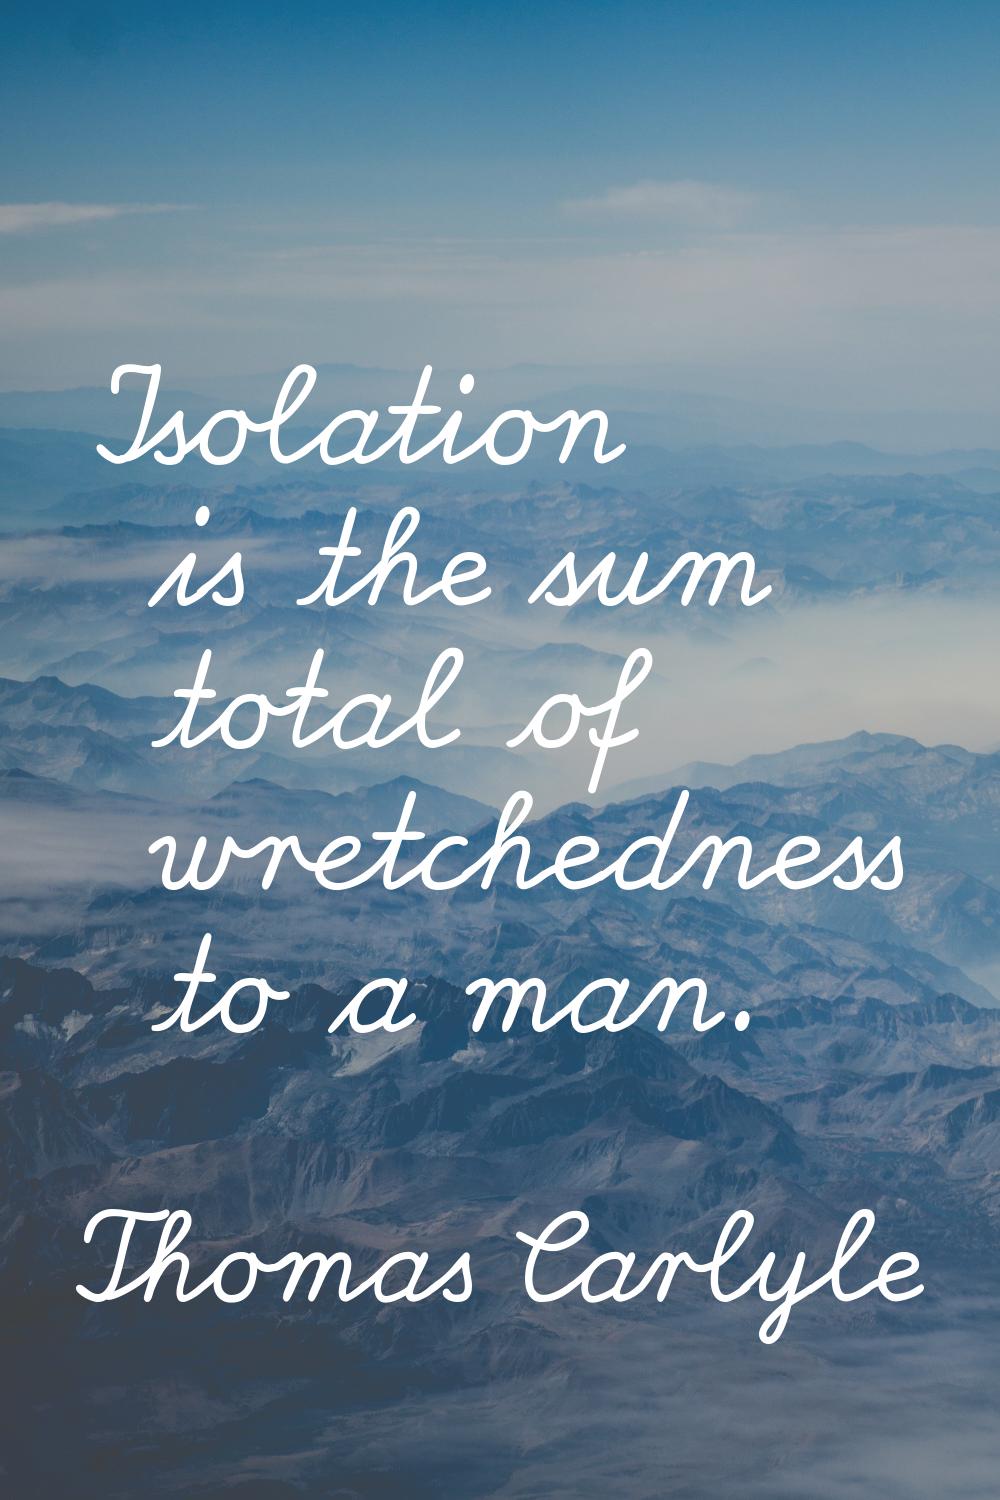 Isolation is the sum total of wretchedness to a man.